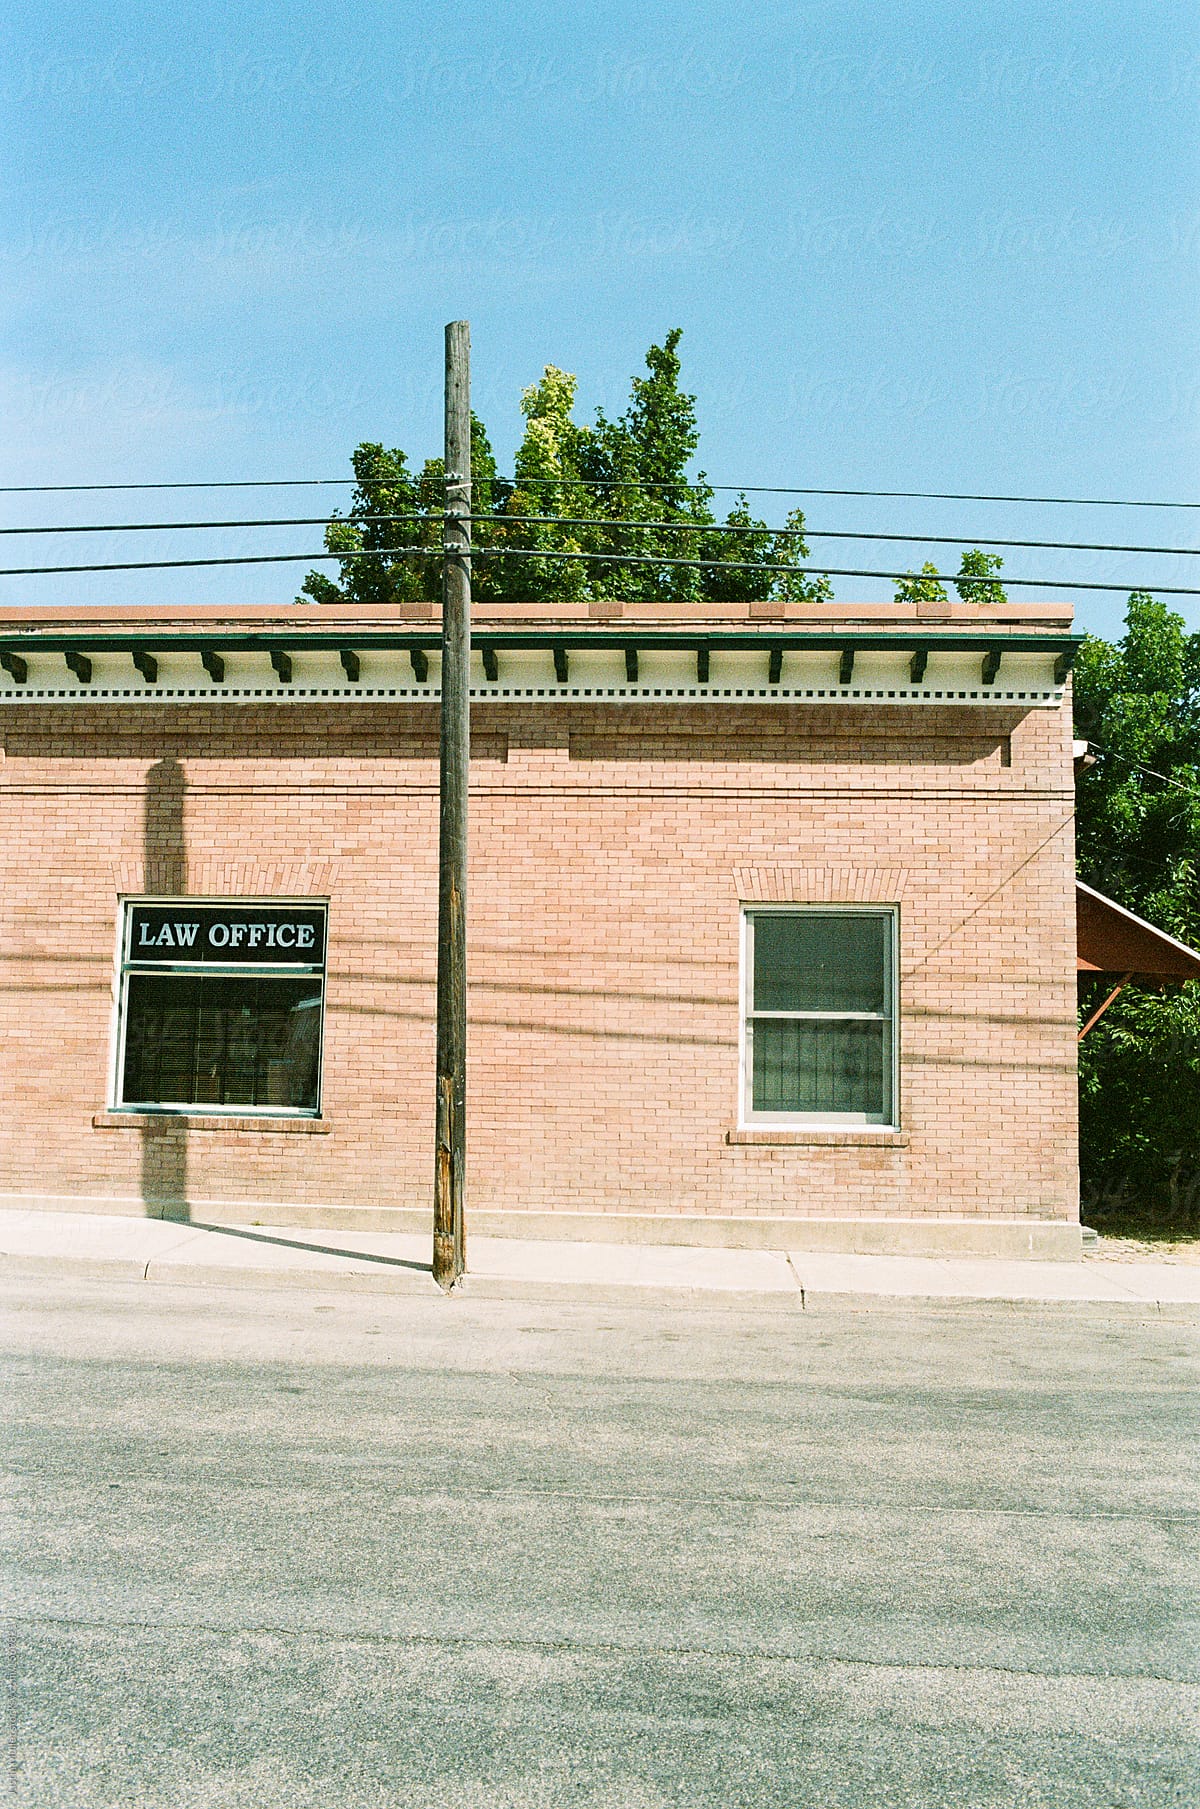 Brick building law office in small quiet town